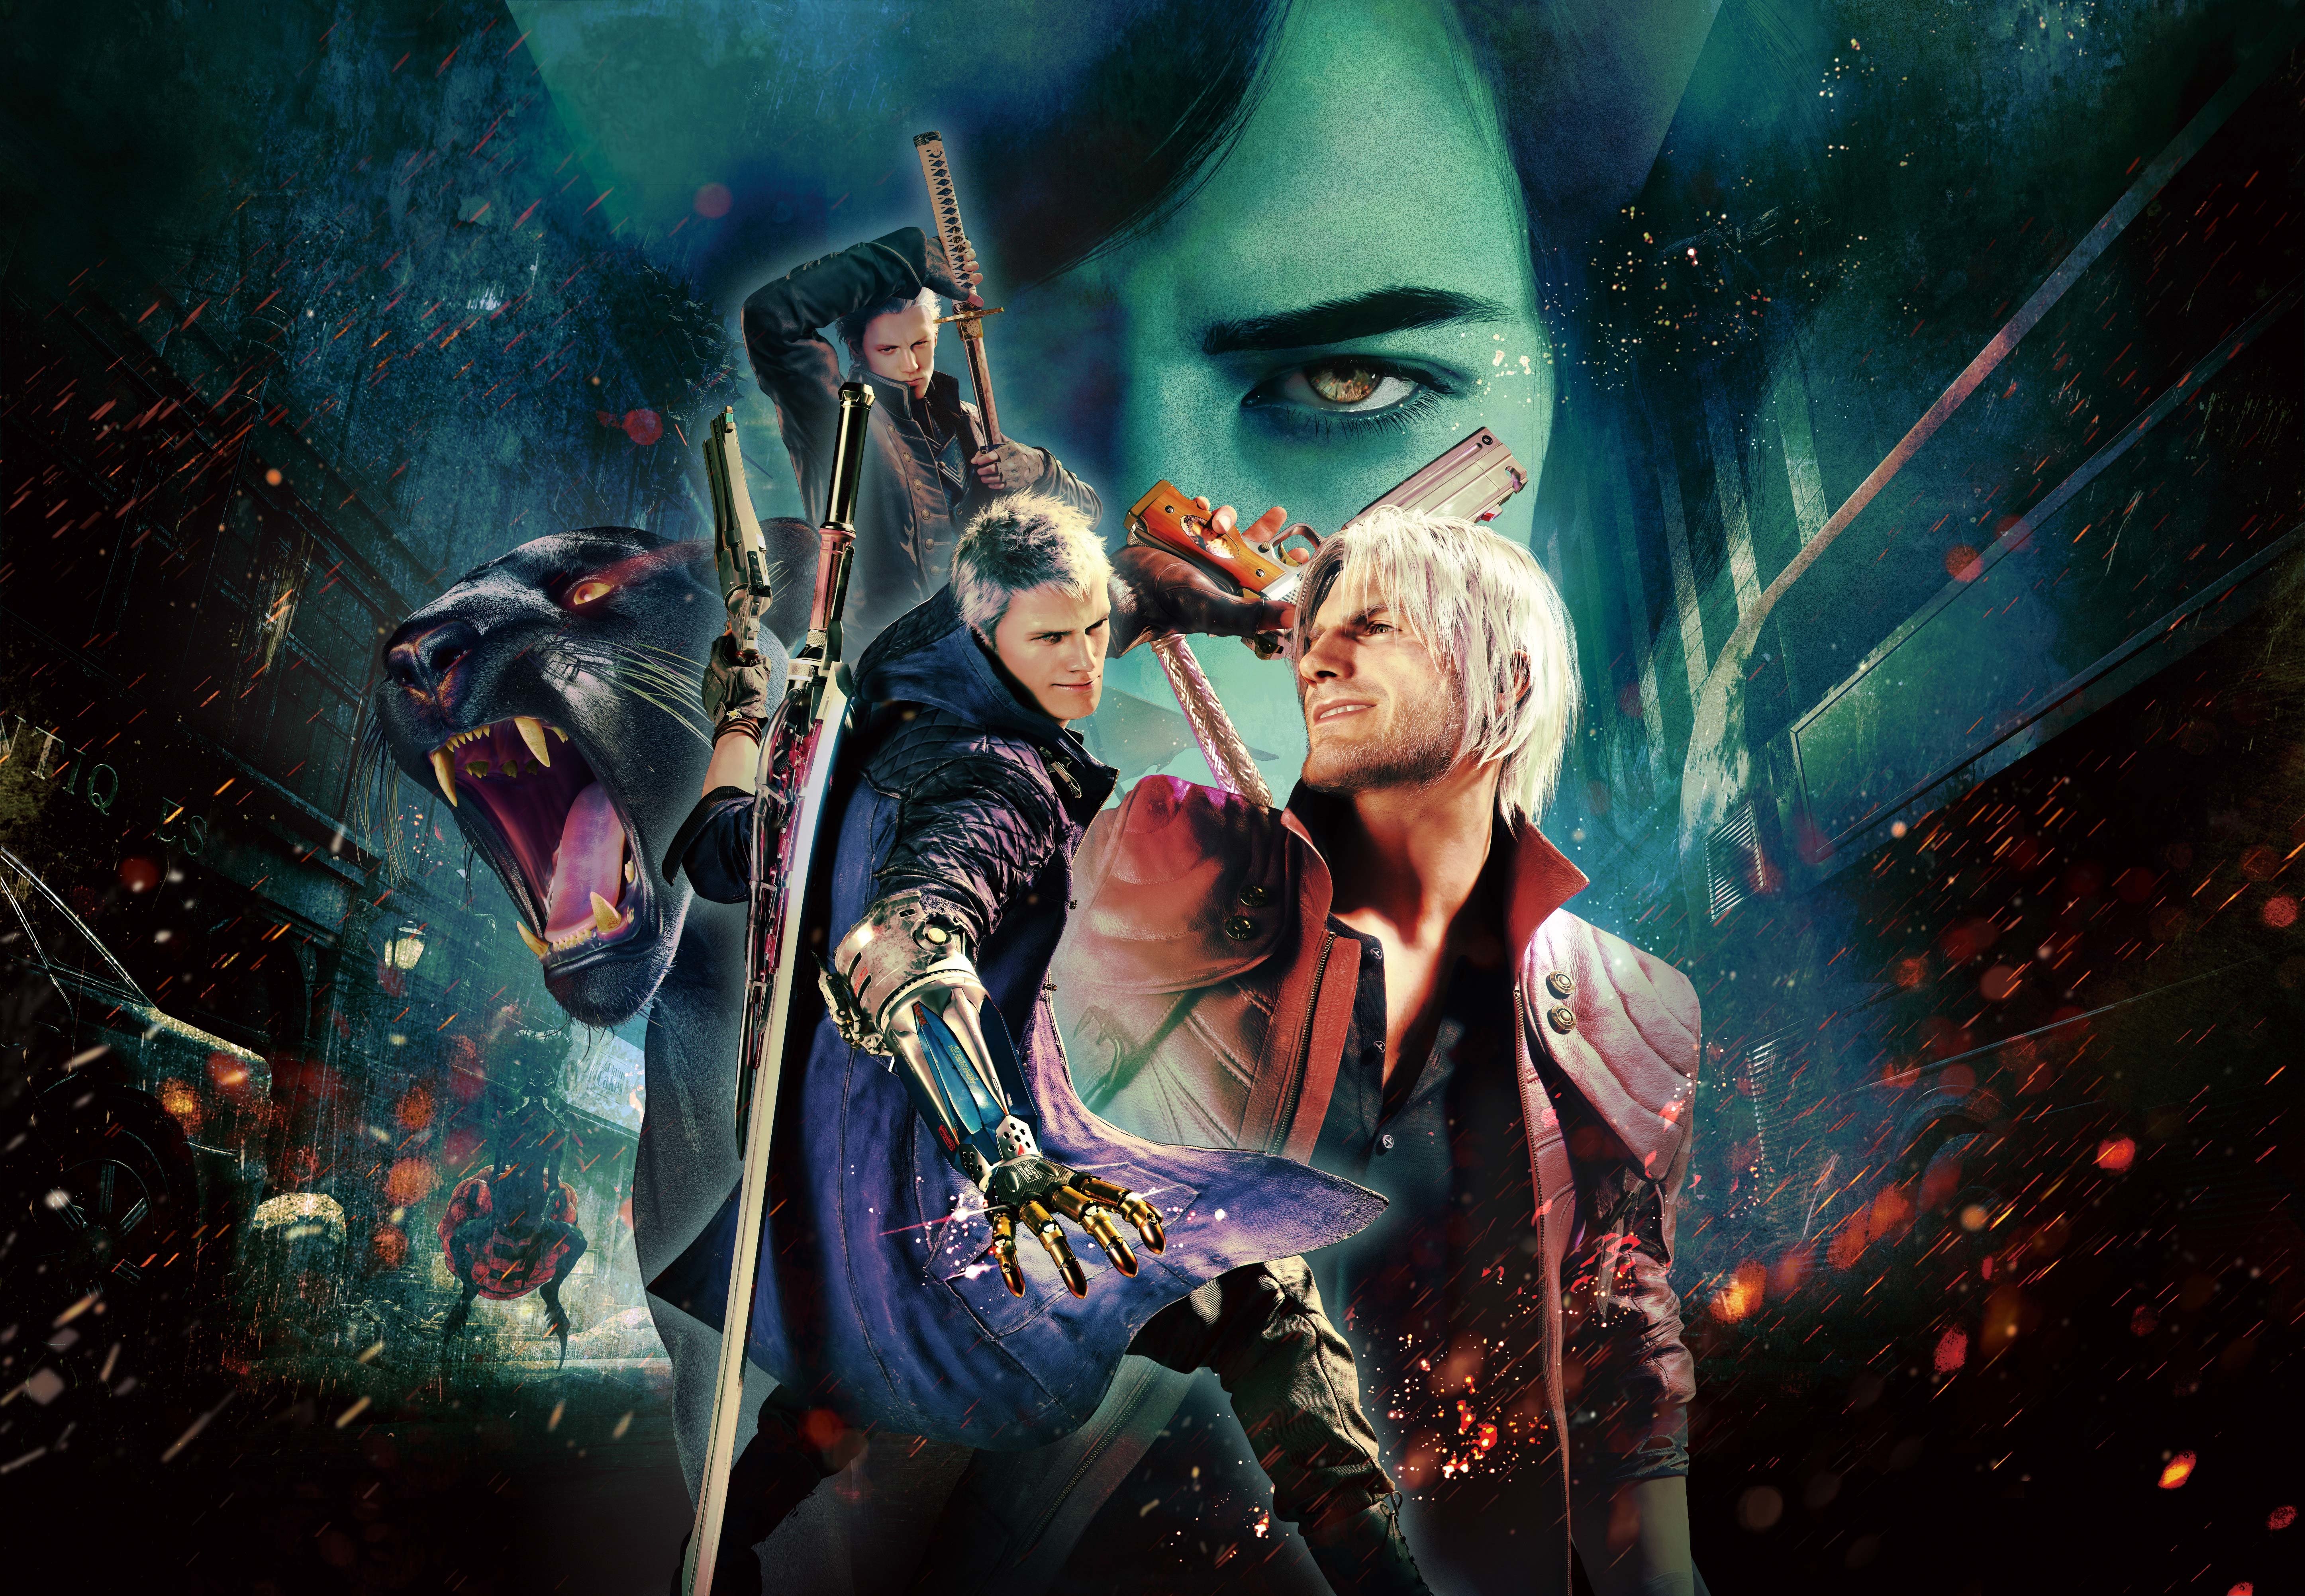 Wallpaper Devil May Cry 5 Special Edition